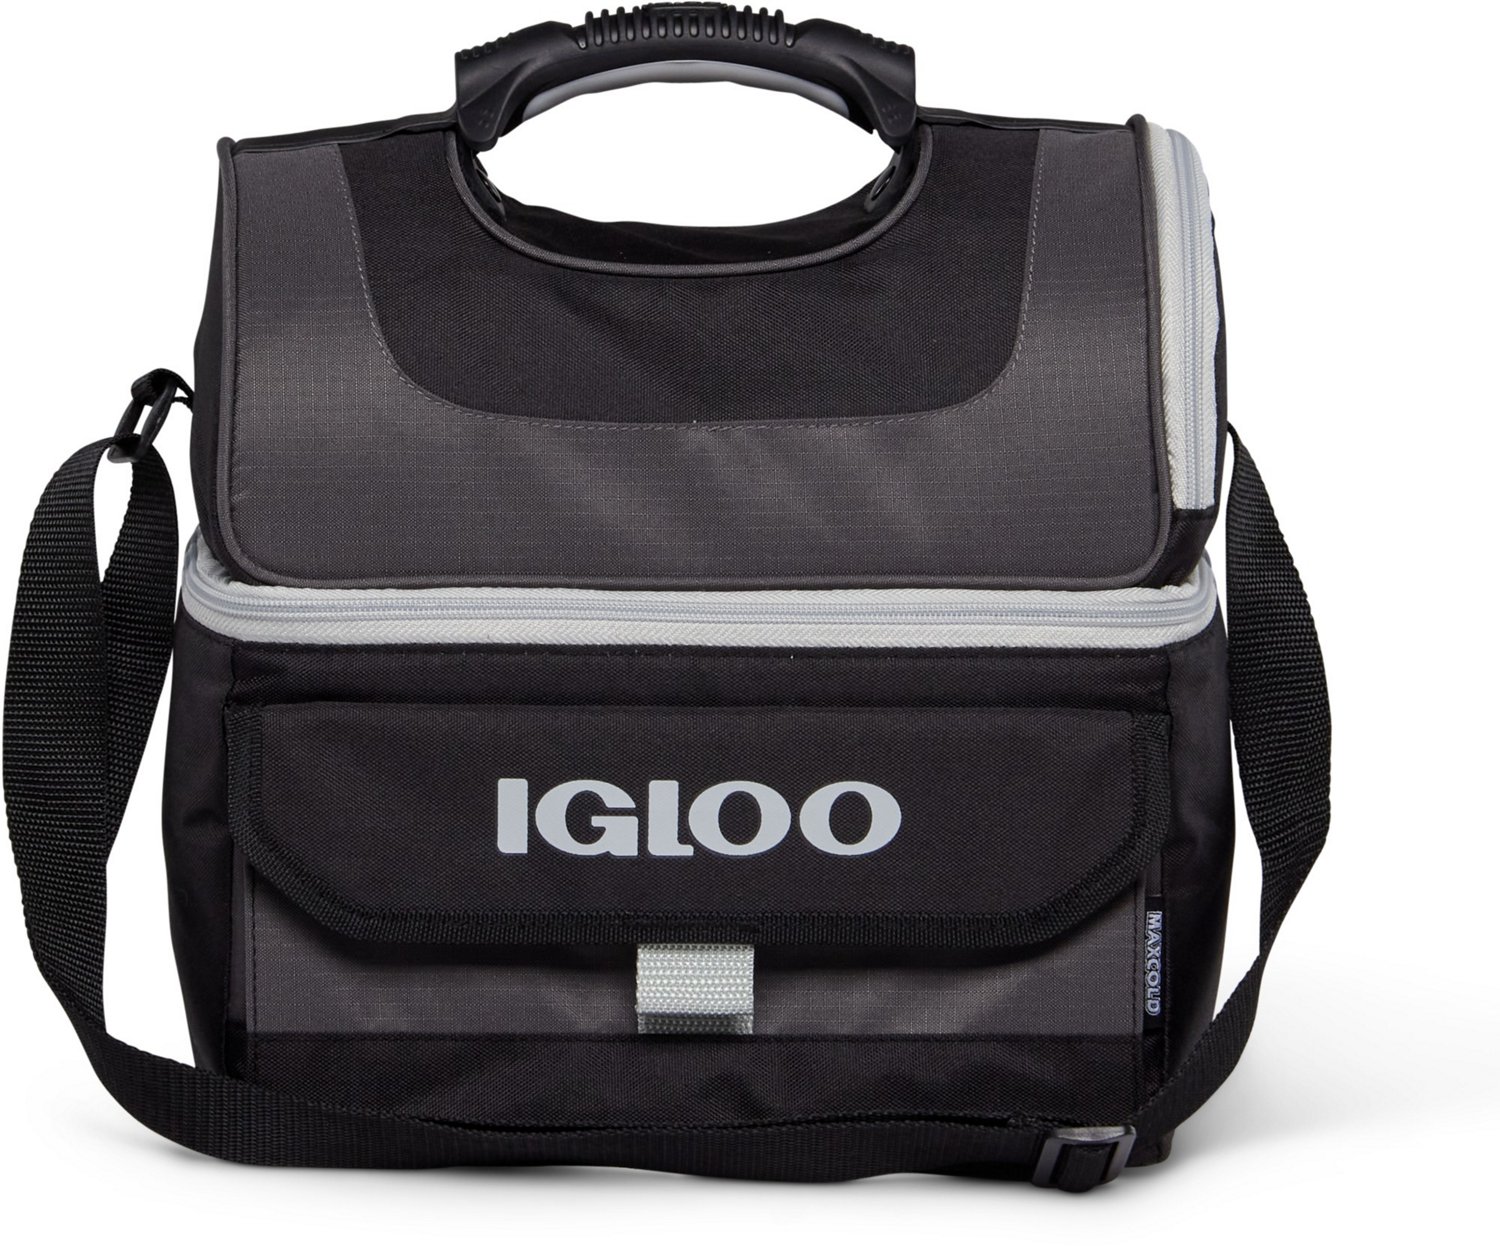 Playmate Gripper 16-Can MaxCold Cooler Bag by Igloo at Fleet Farm